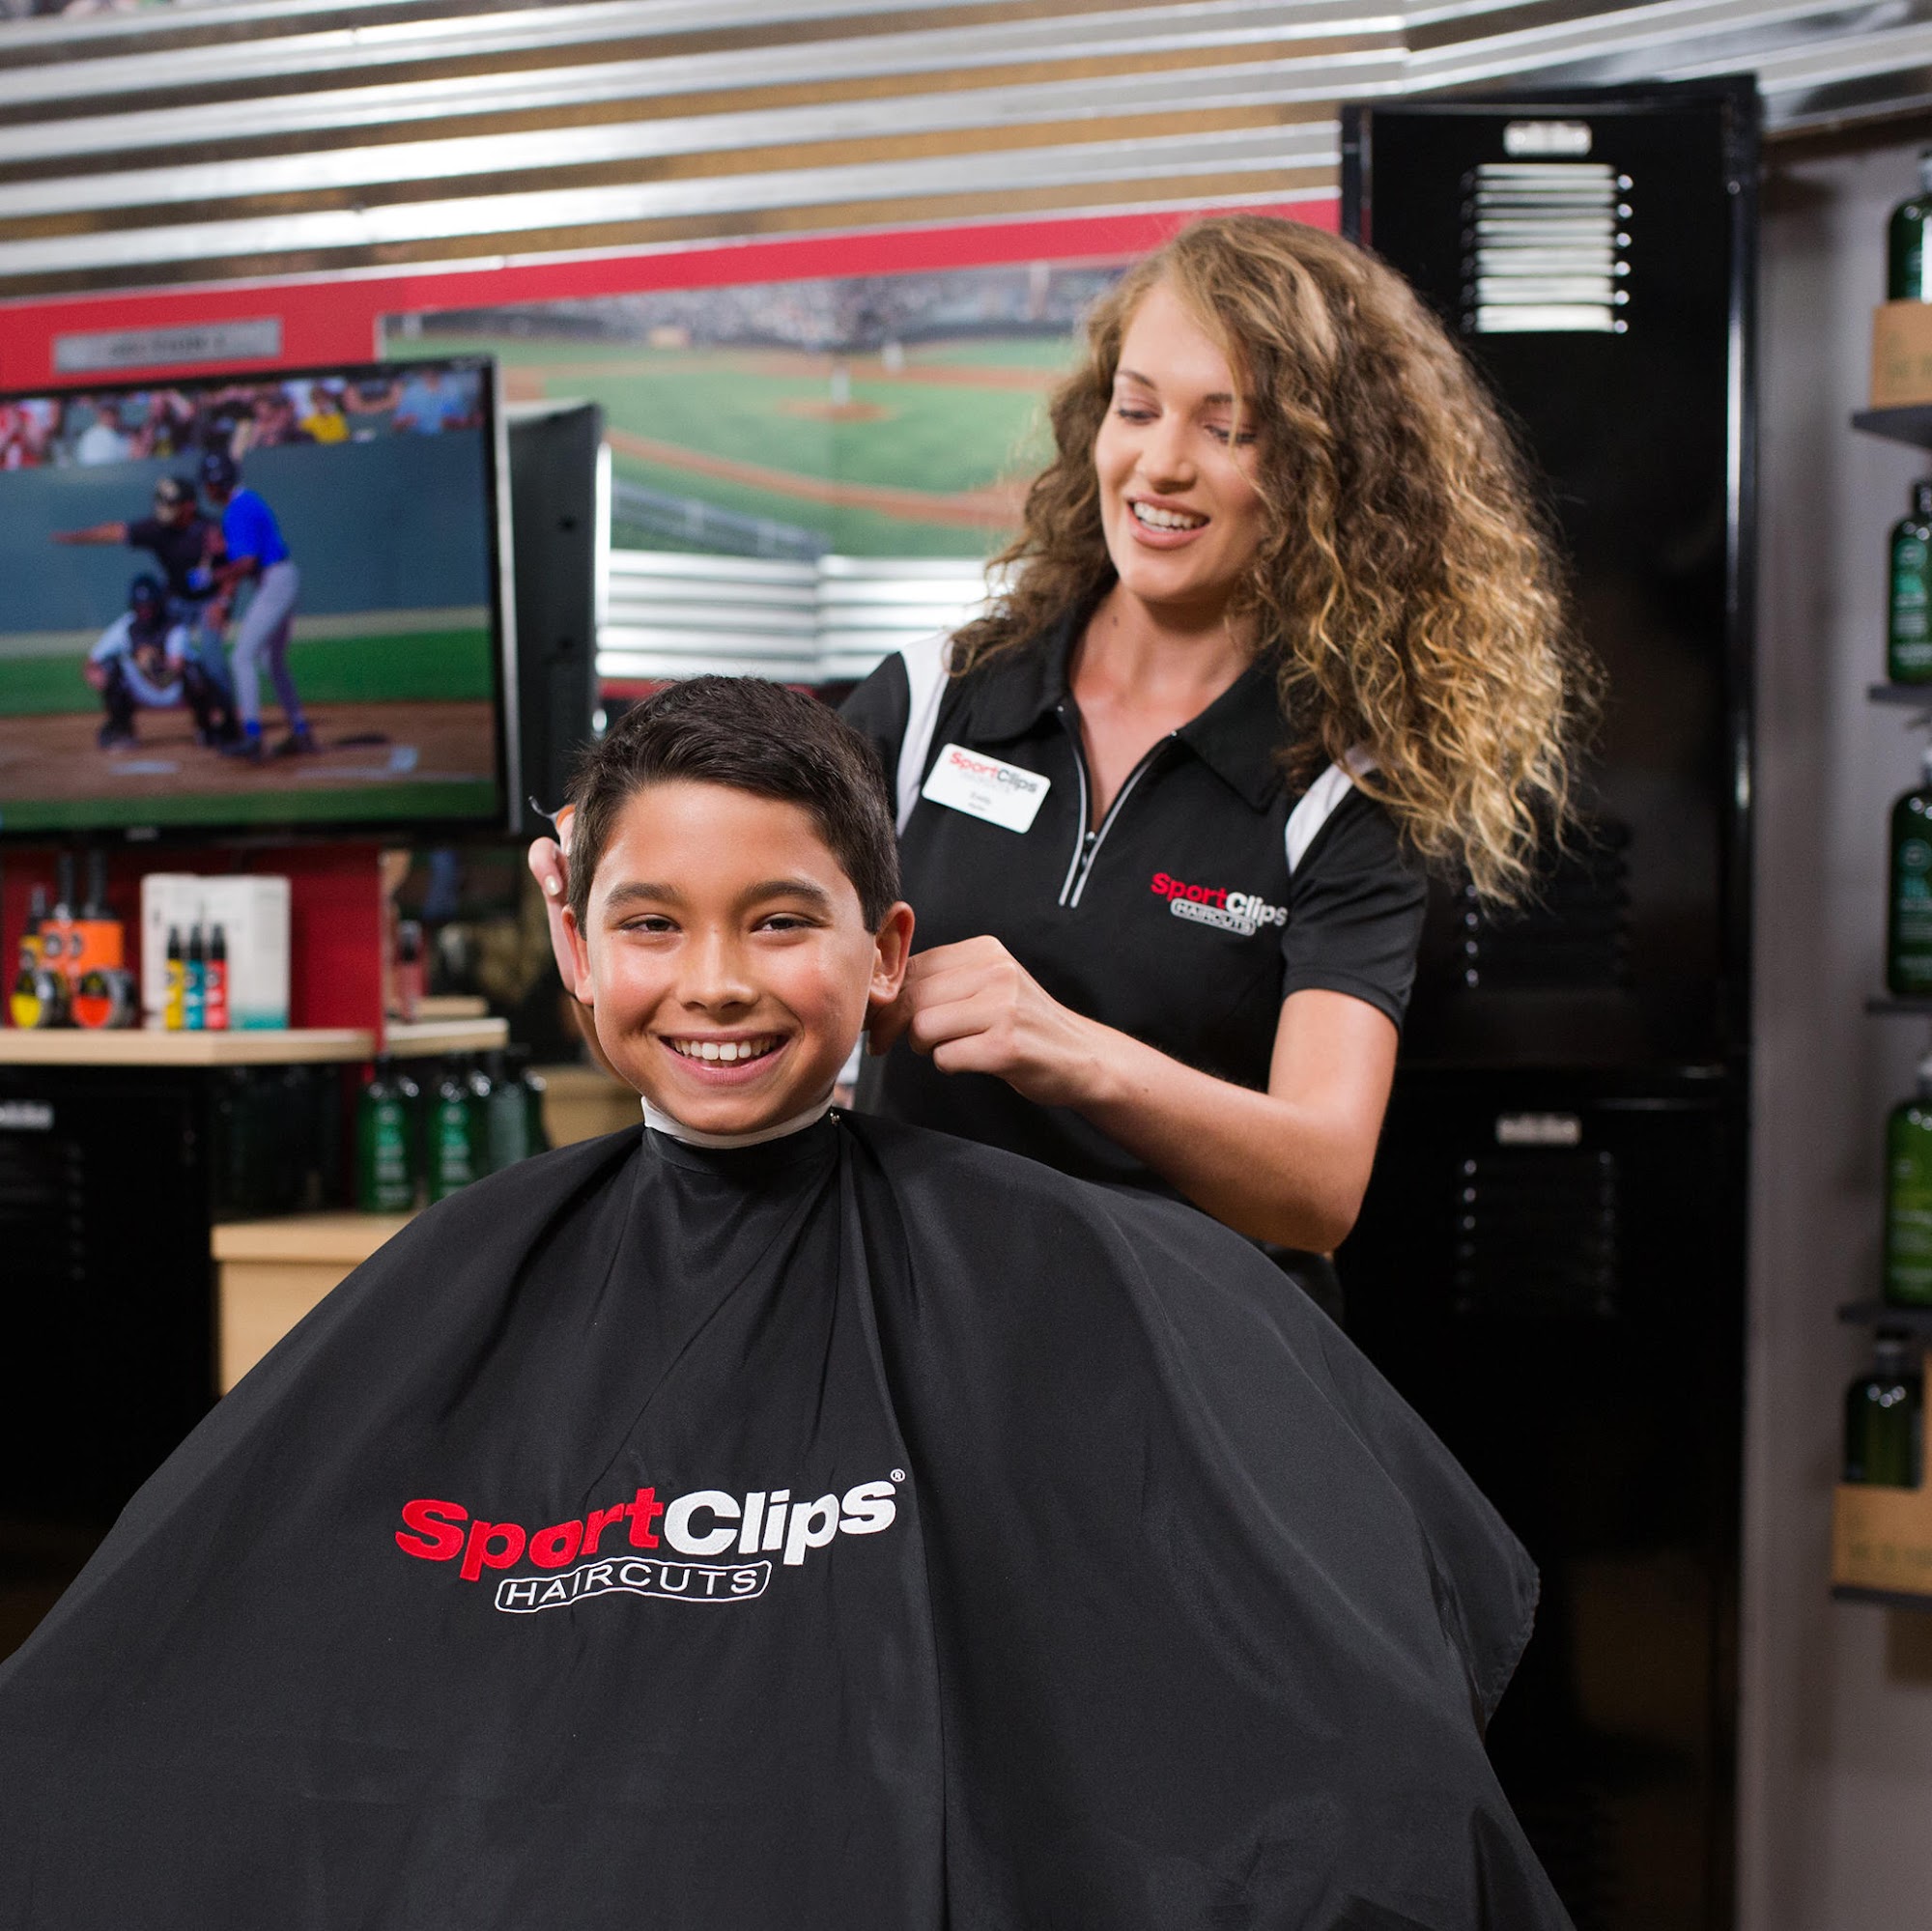 Sport Clips Haircuts of Montgomery 2077 Orchard Rd, Montgomery Illinois 60538